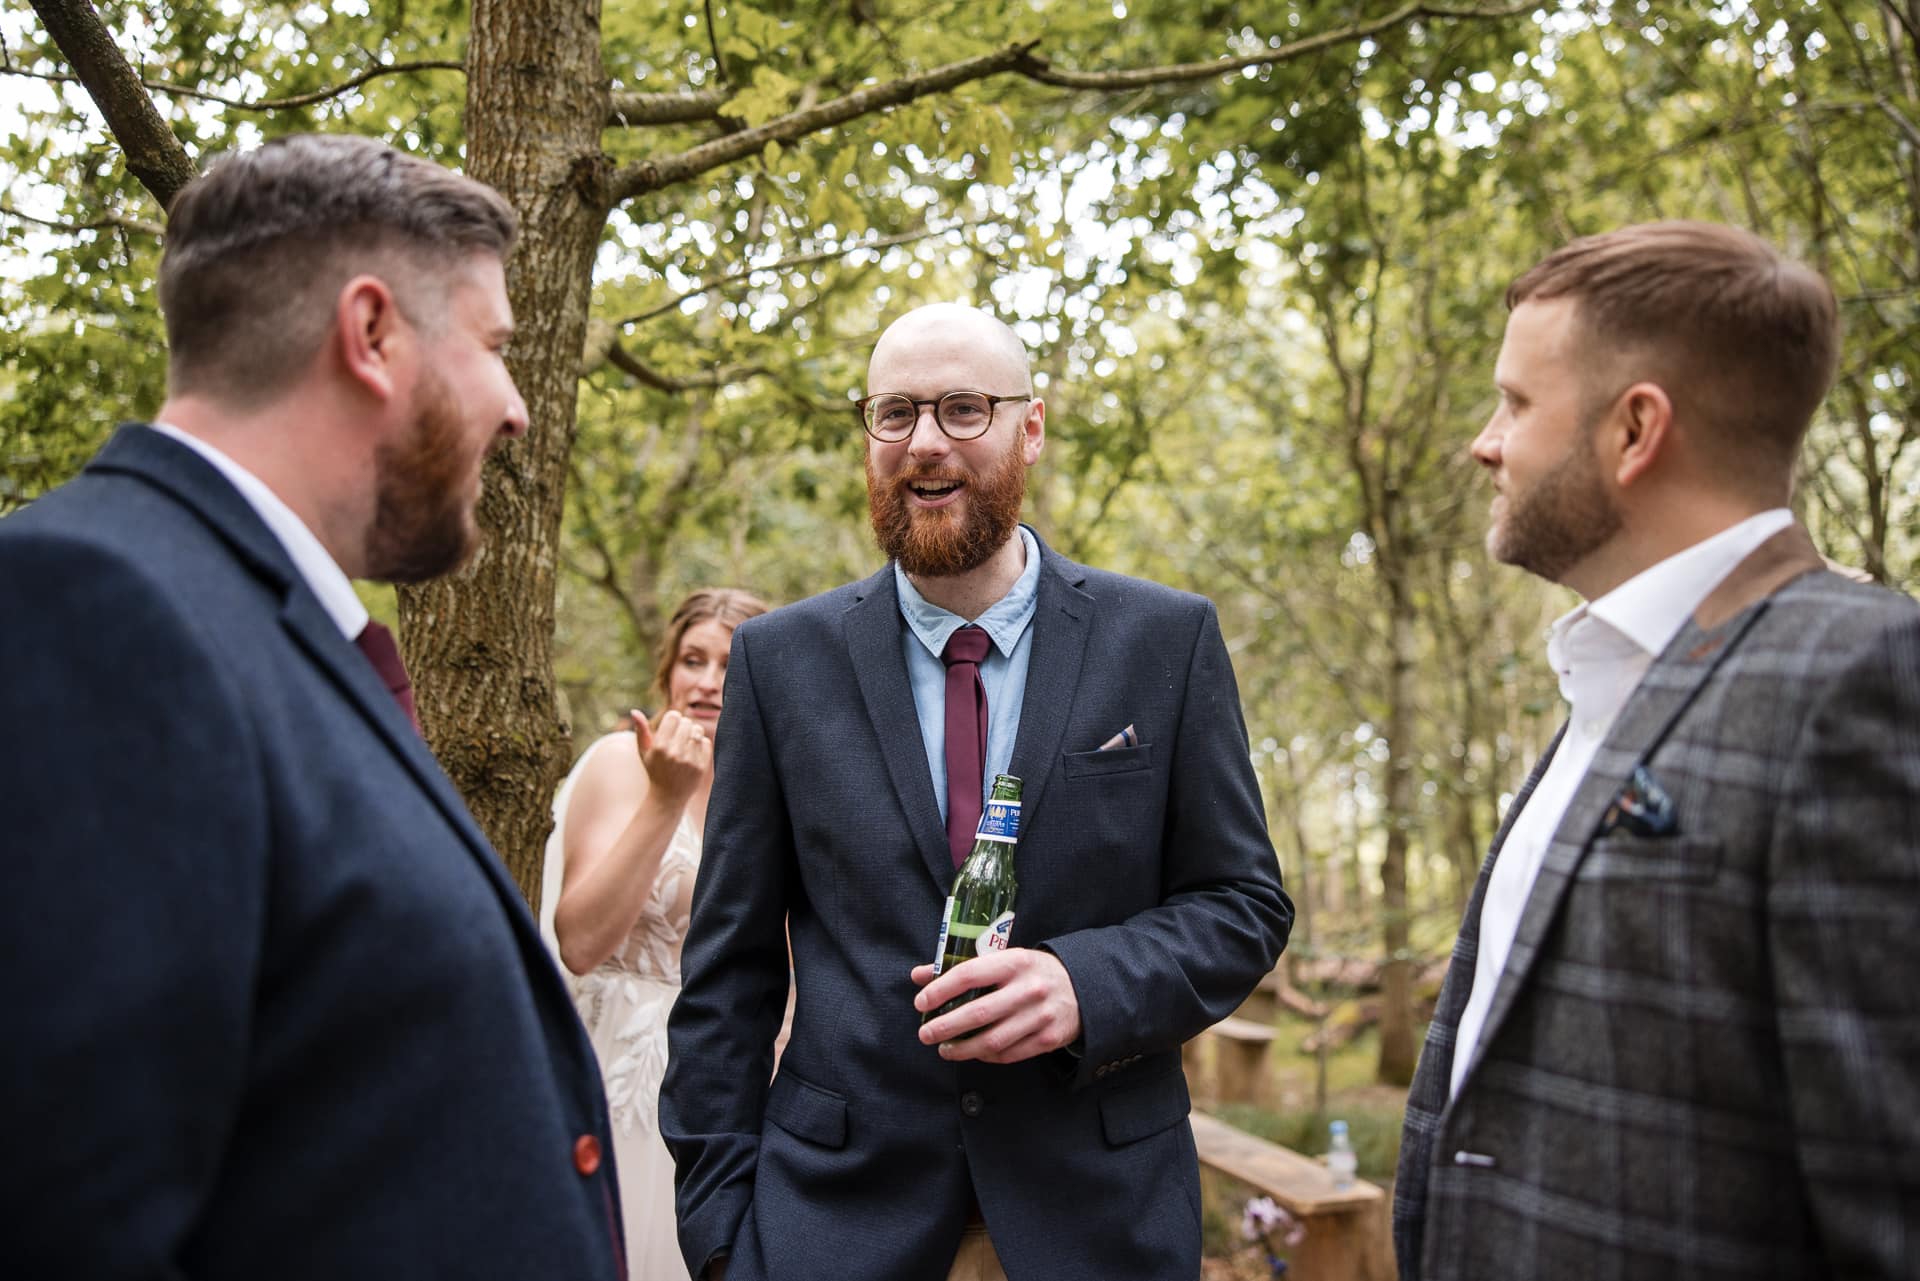 Guests chatting in the woodland at the Endeavour Woodland wedding venue